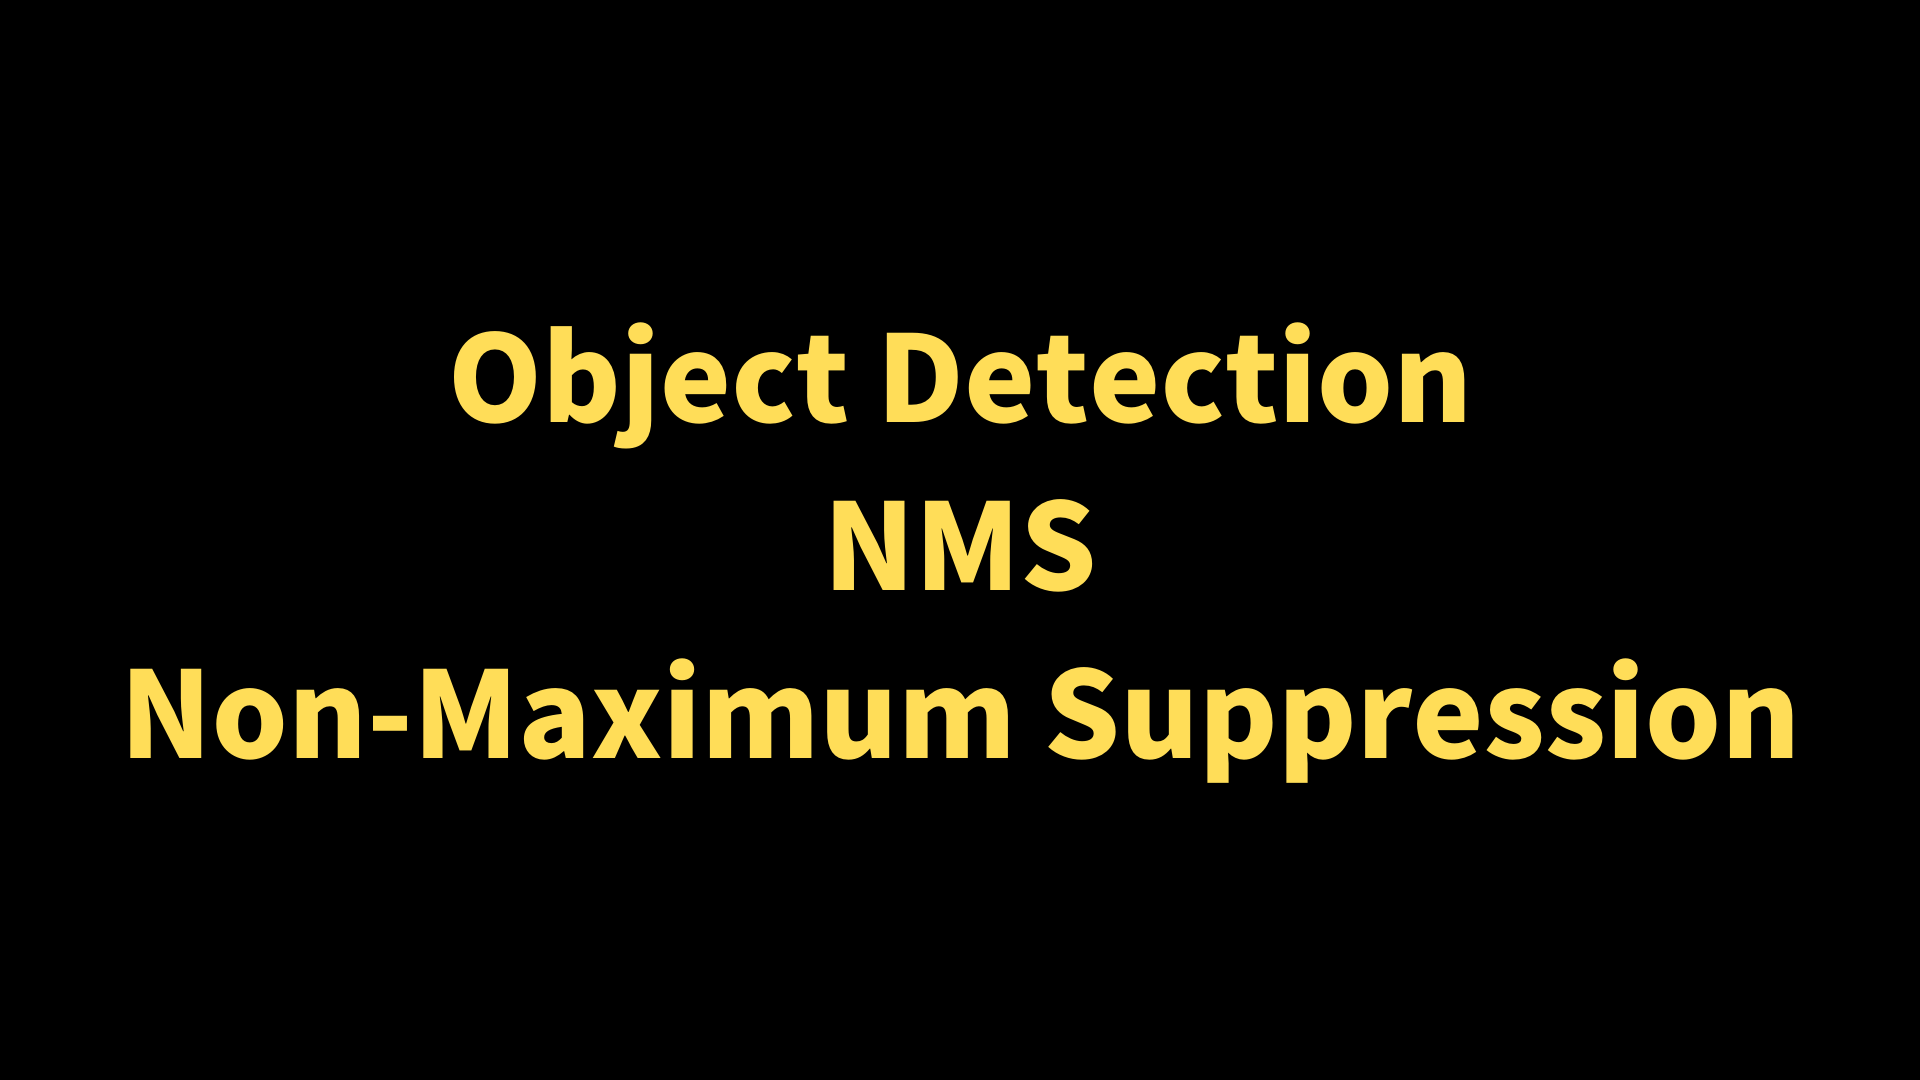 Object Detection: Non-Maximum Suppression (NMS)